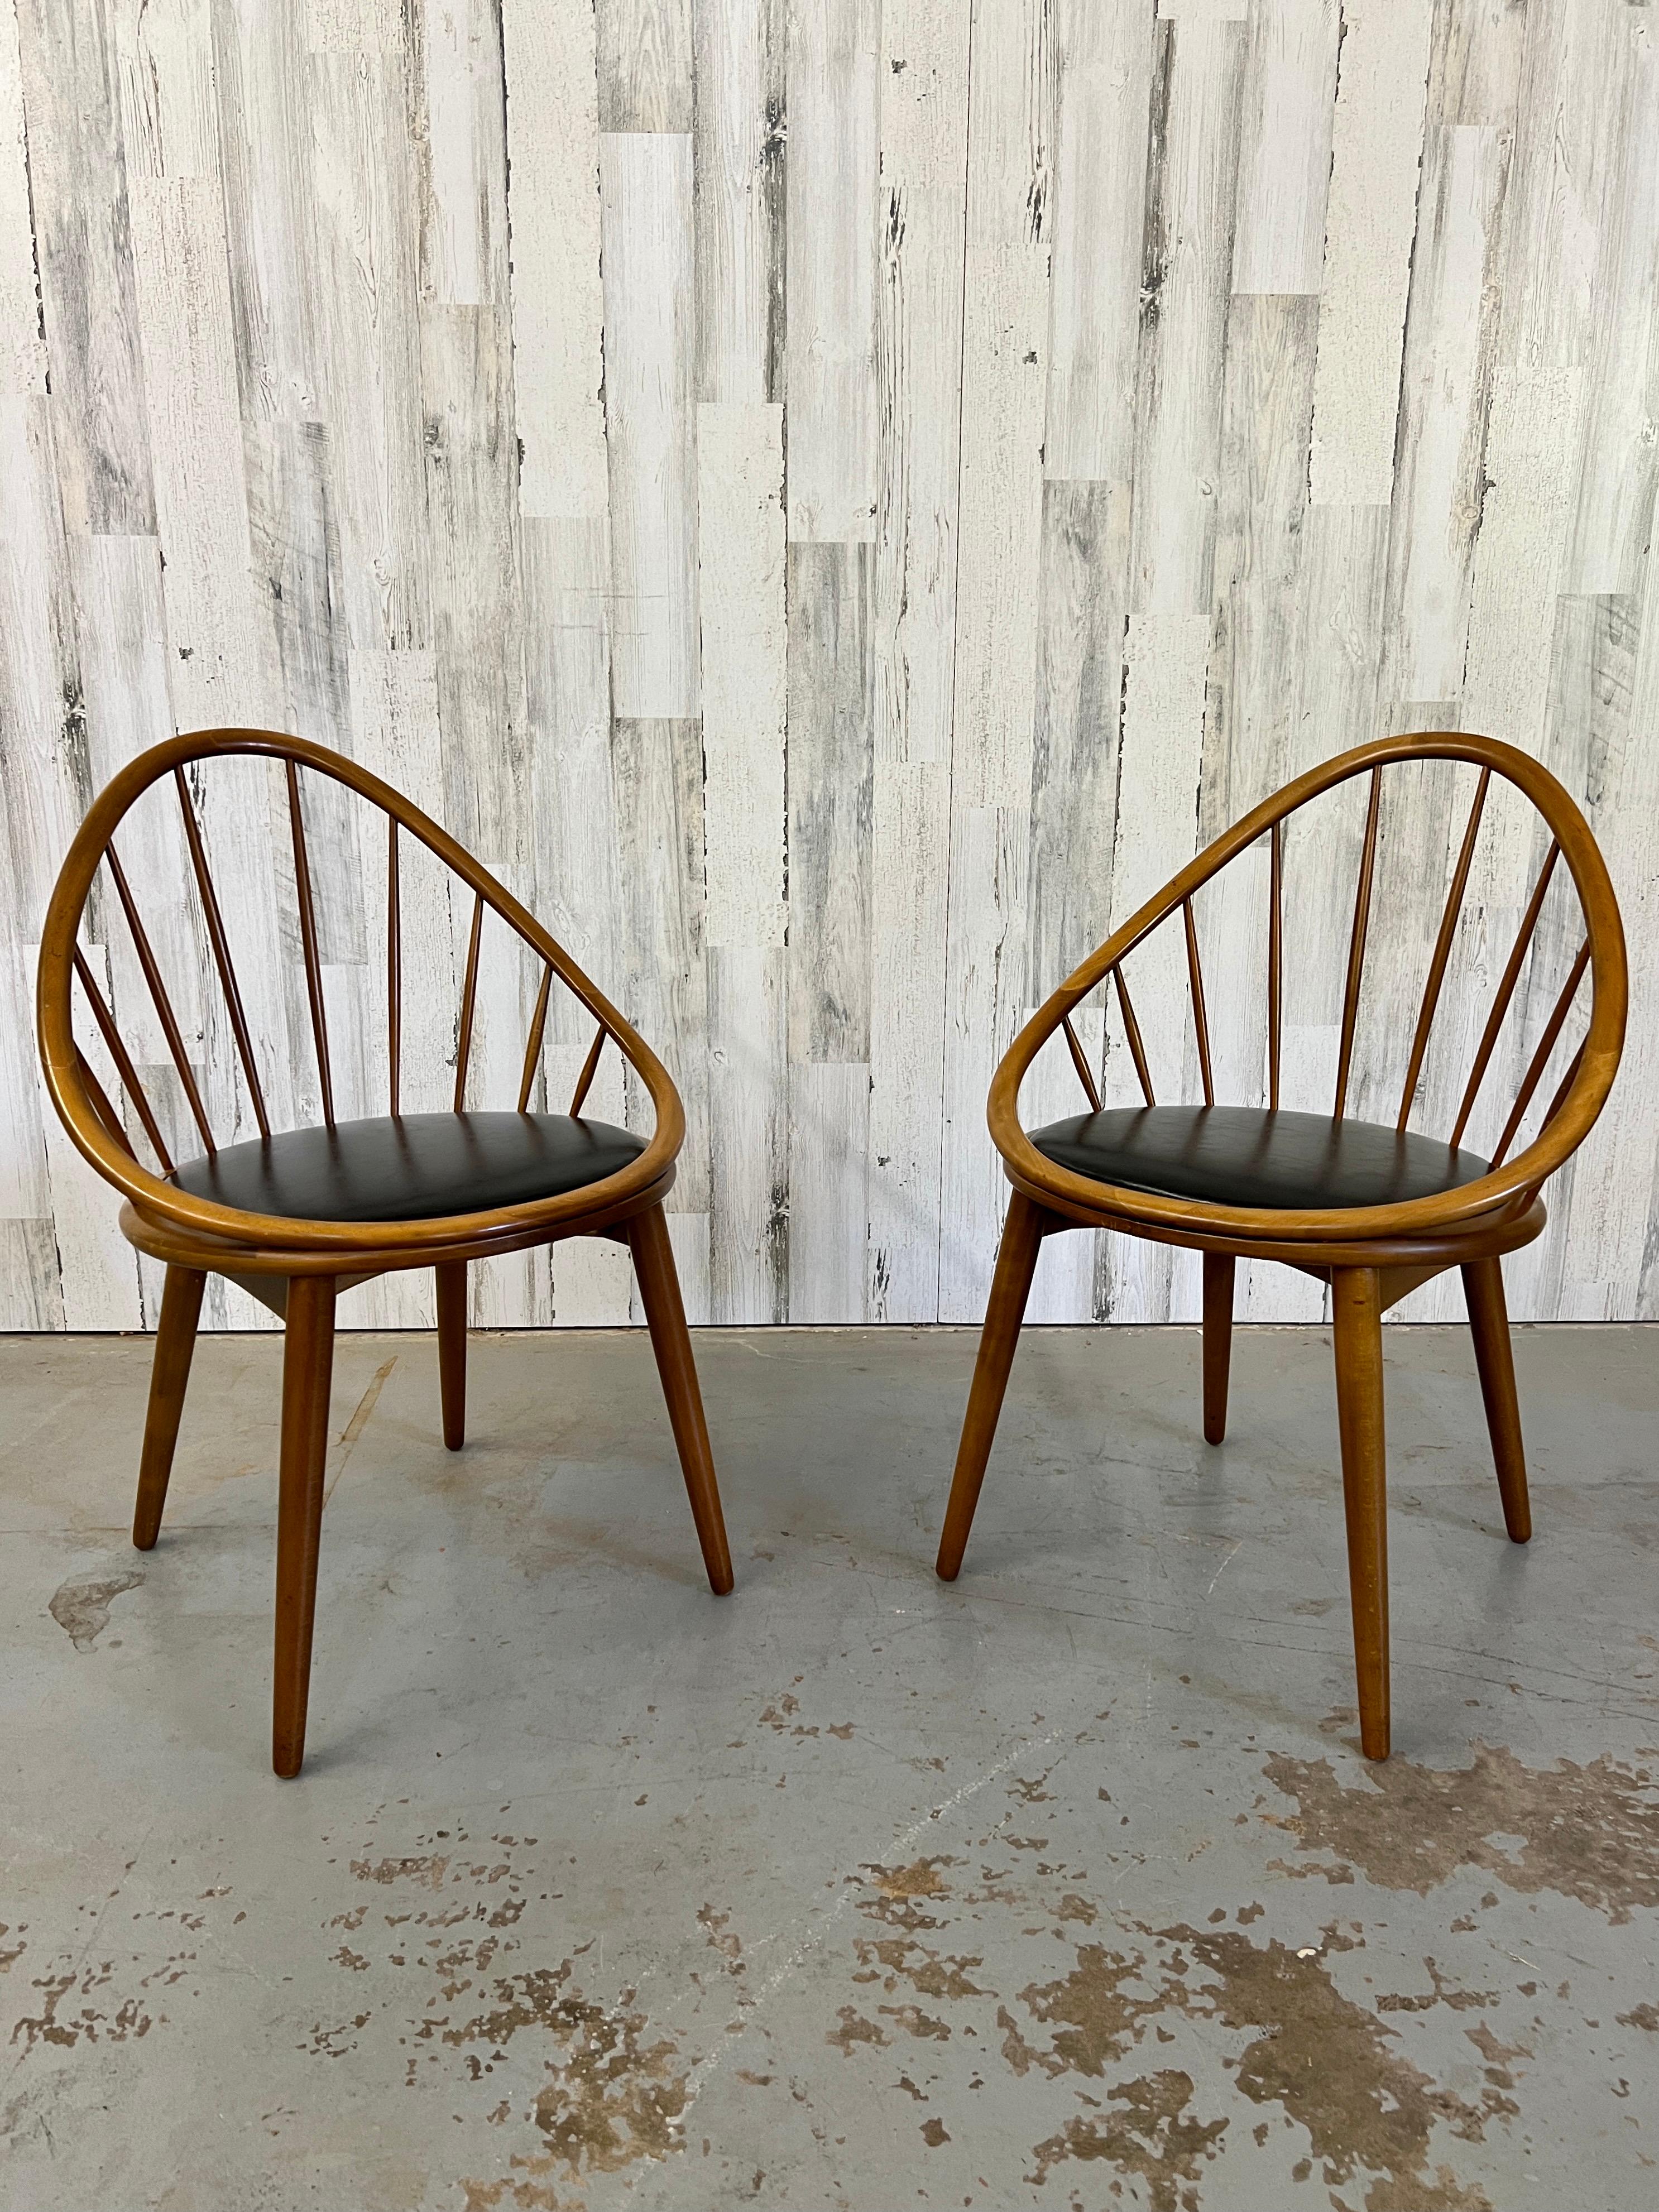 Solid Beech wood spindle back hoop chairs in the style Kofed Larsen with original vinyl seats.